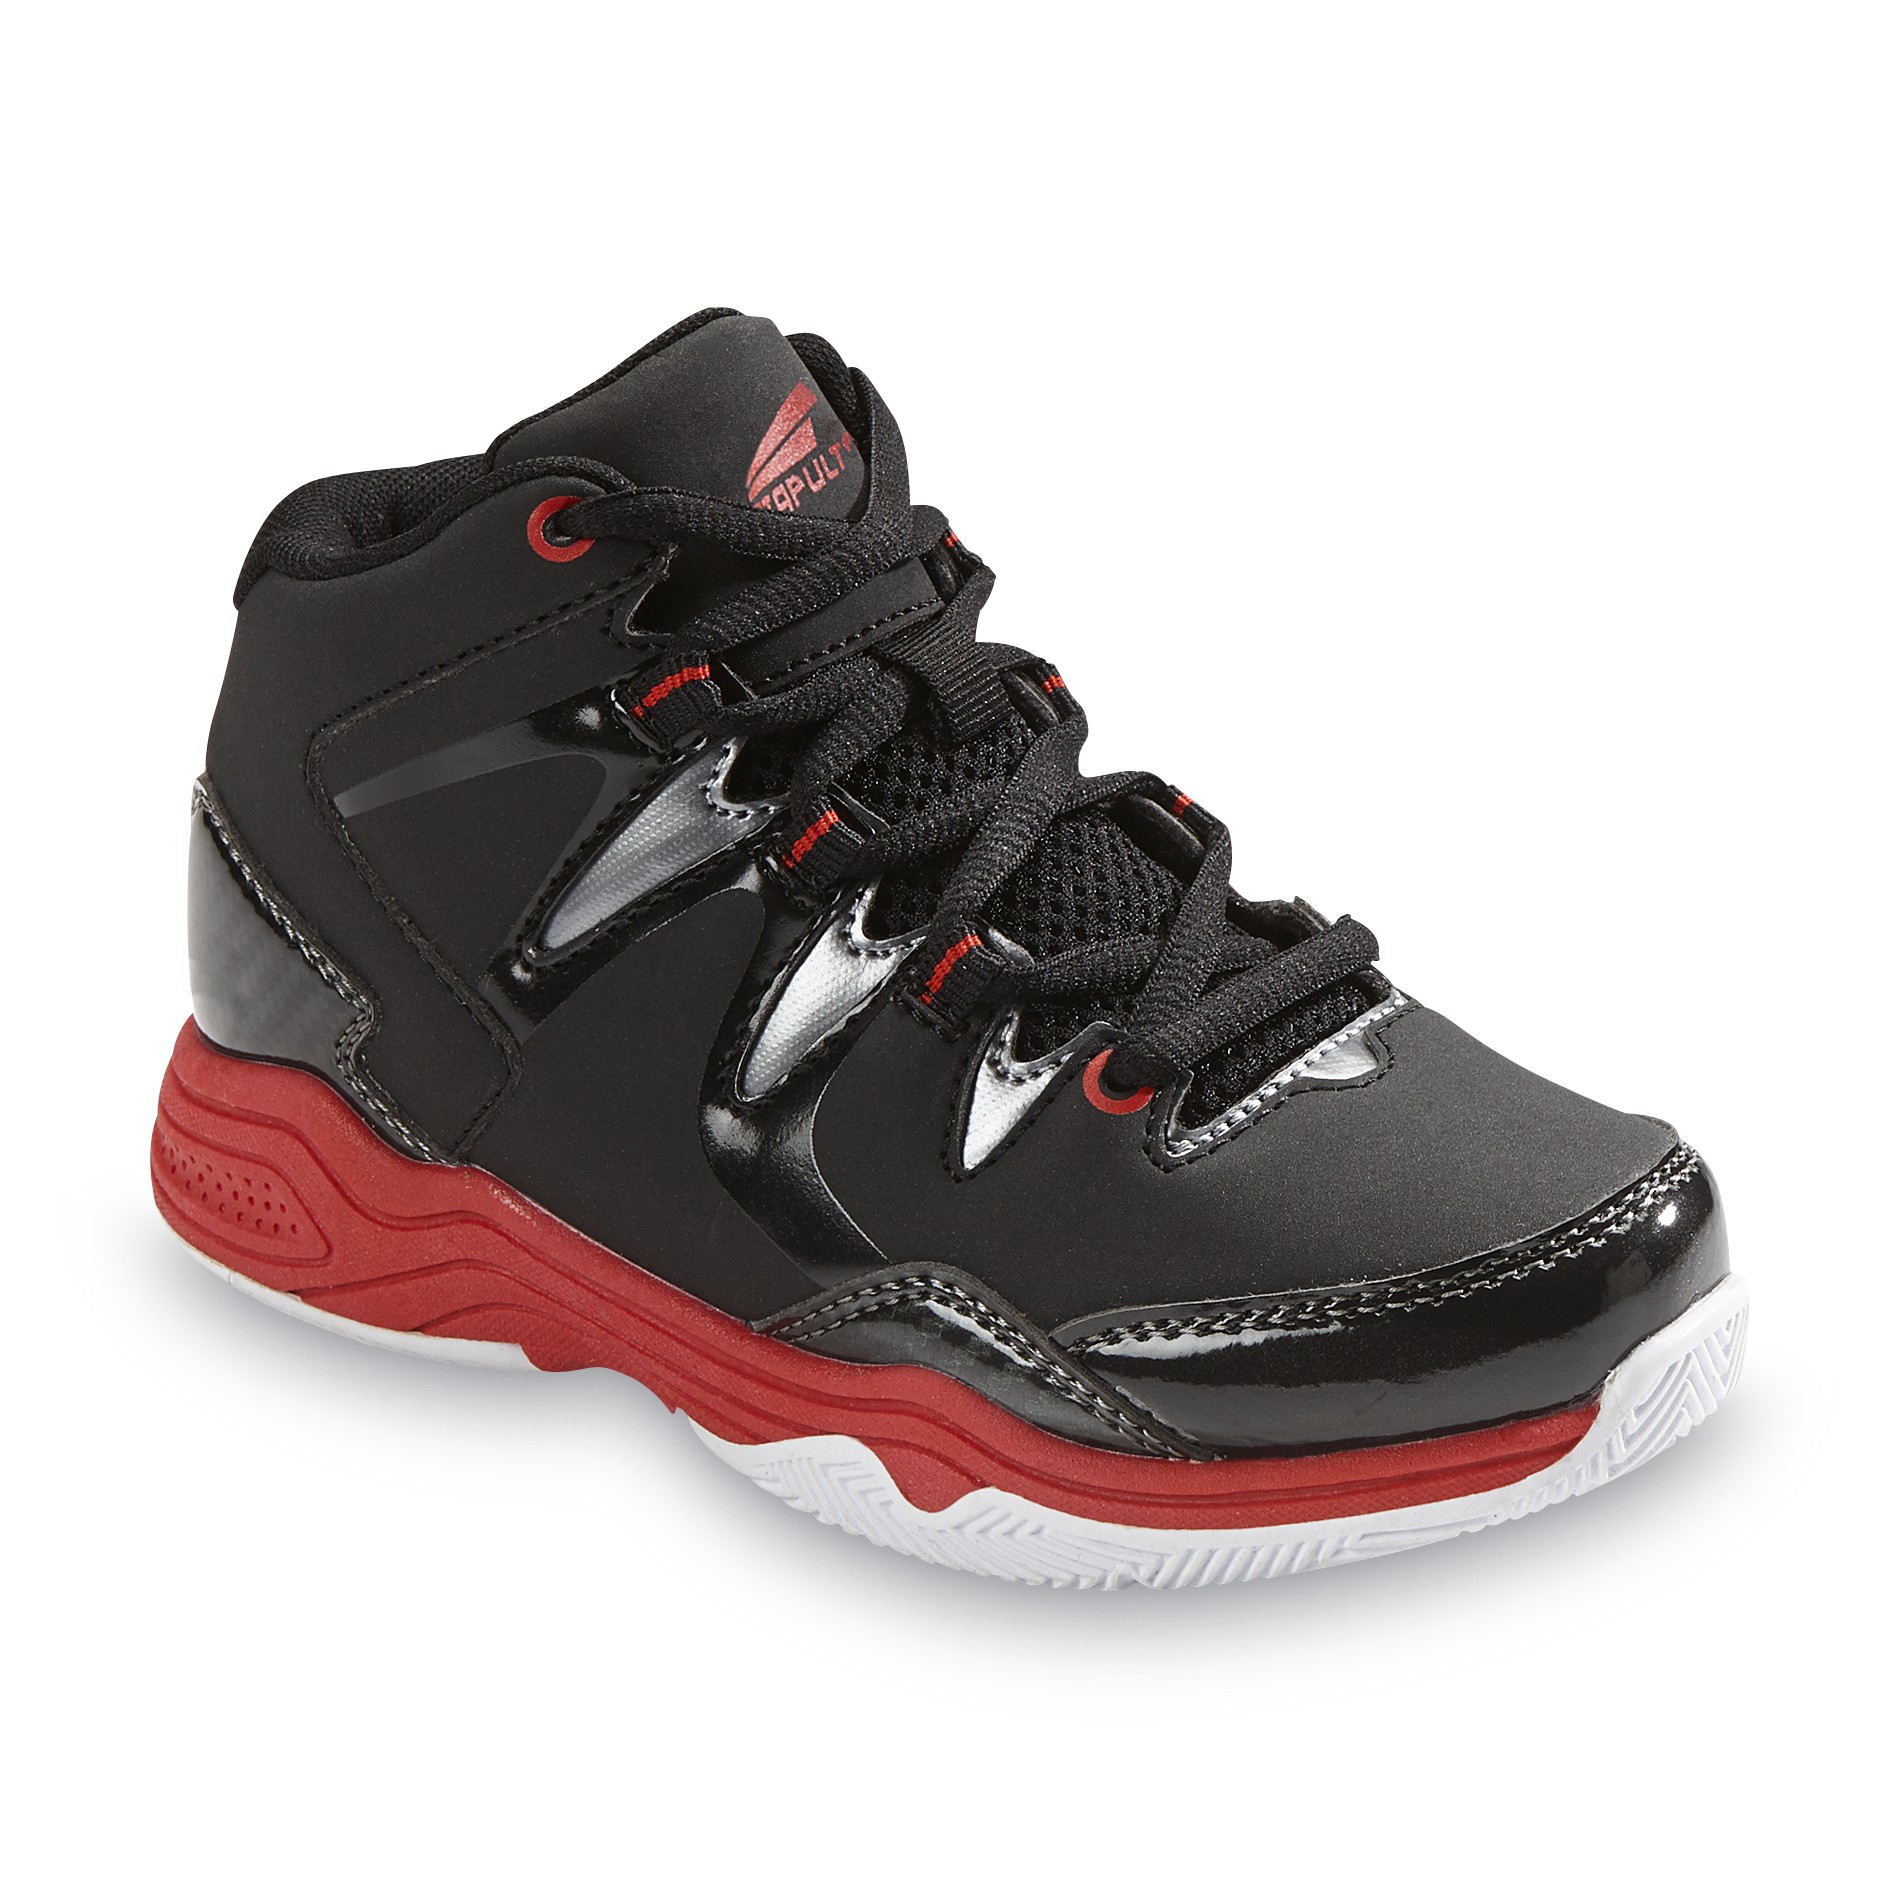 CATAPULT Boy's Three Point High-Top Basketball Shoe - Black/Red